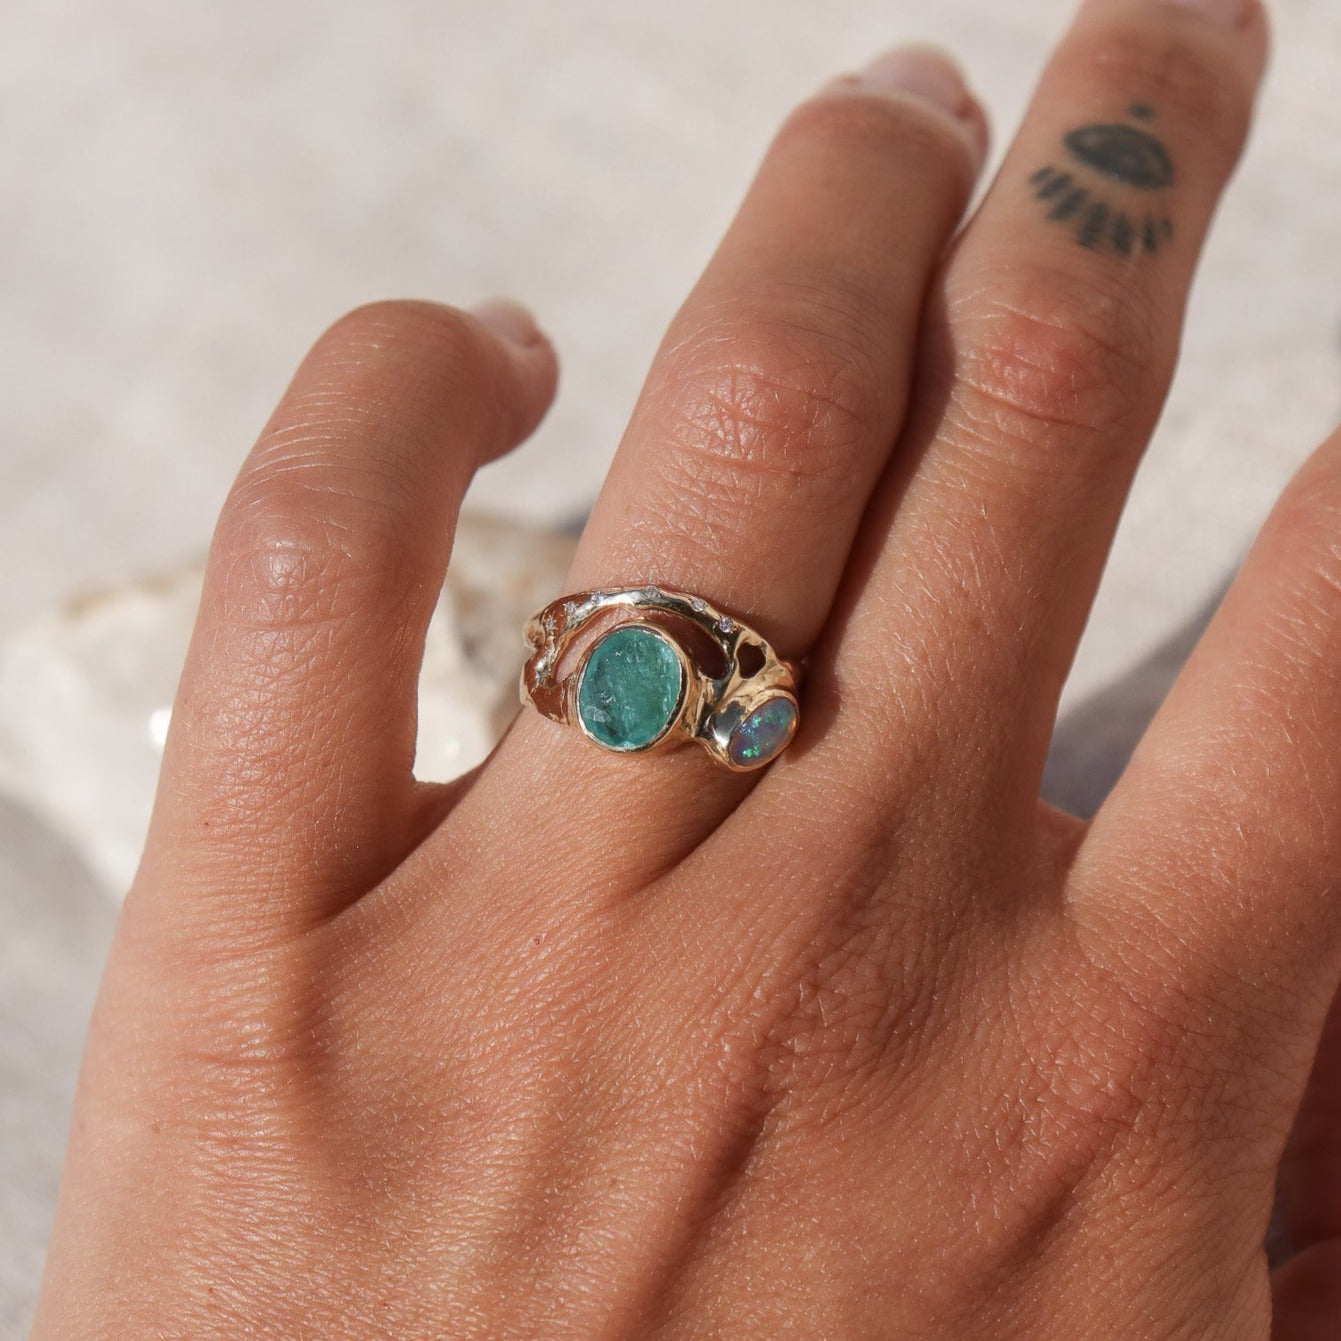 Organically shaped ring with a stunning Paraiba tourmaline and opal, bezel-set and accented with dazzling diamonds shown on a finger for scale.